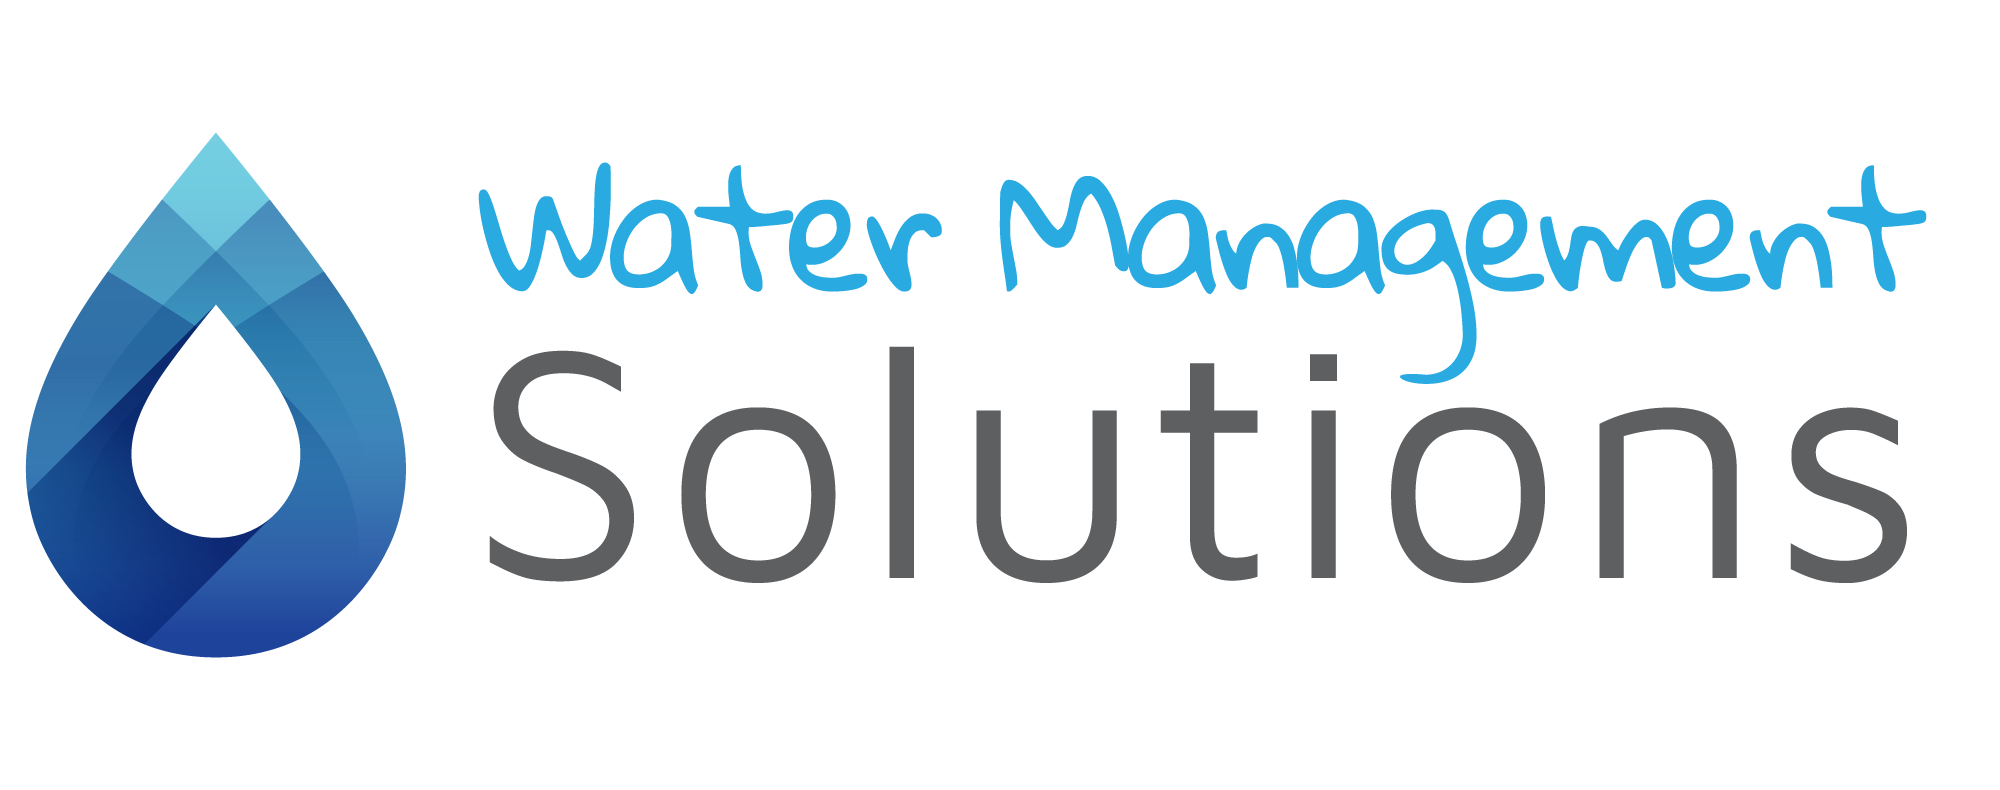 Water Management Solutions - Logo